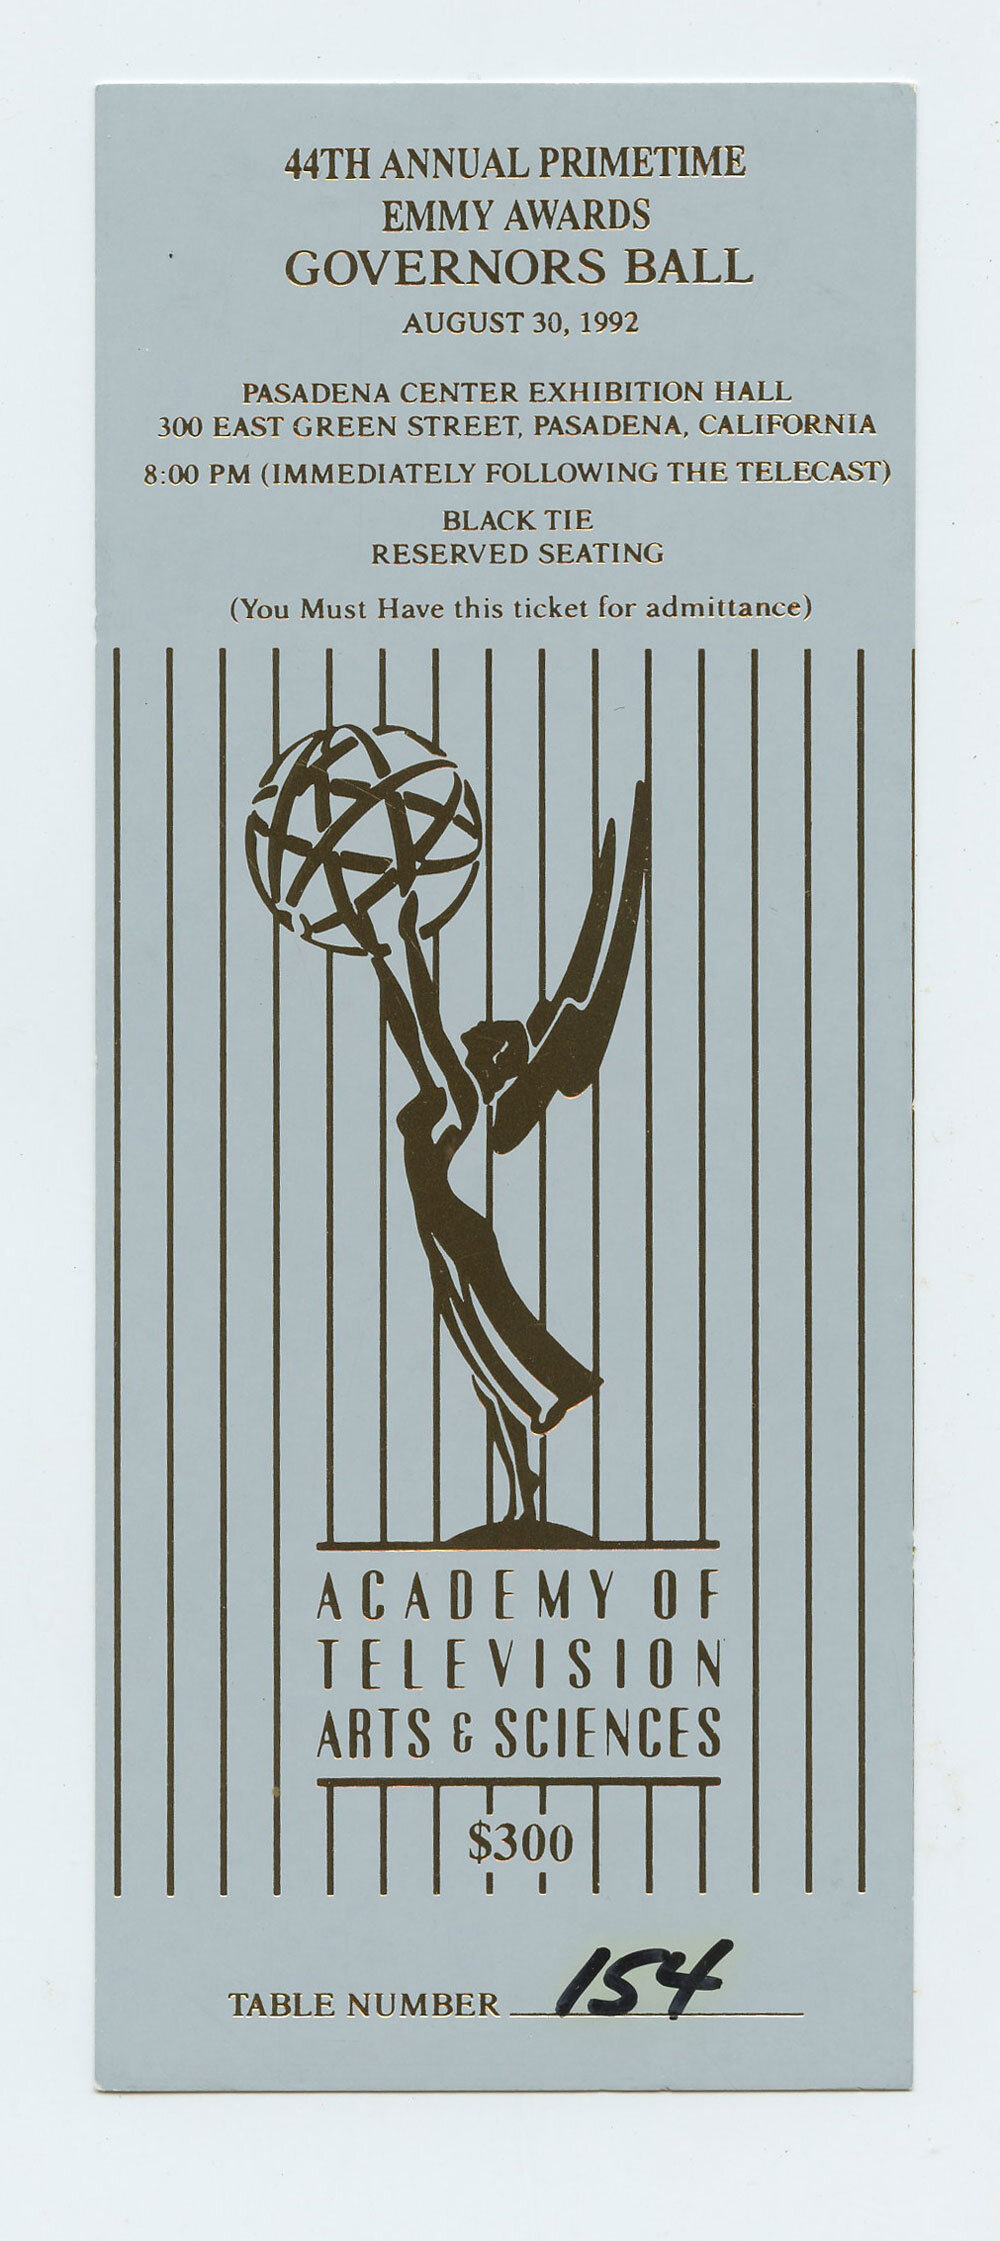 Emmy Awards Governors Ball ticket 1992 44th Annual